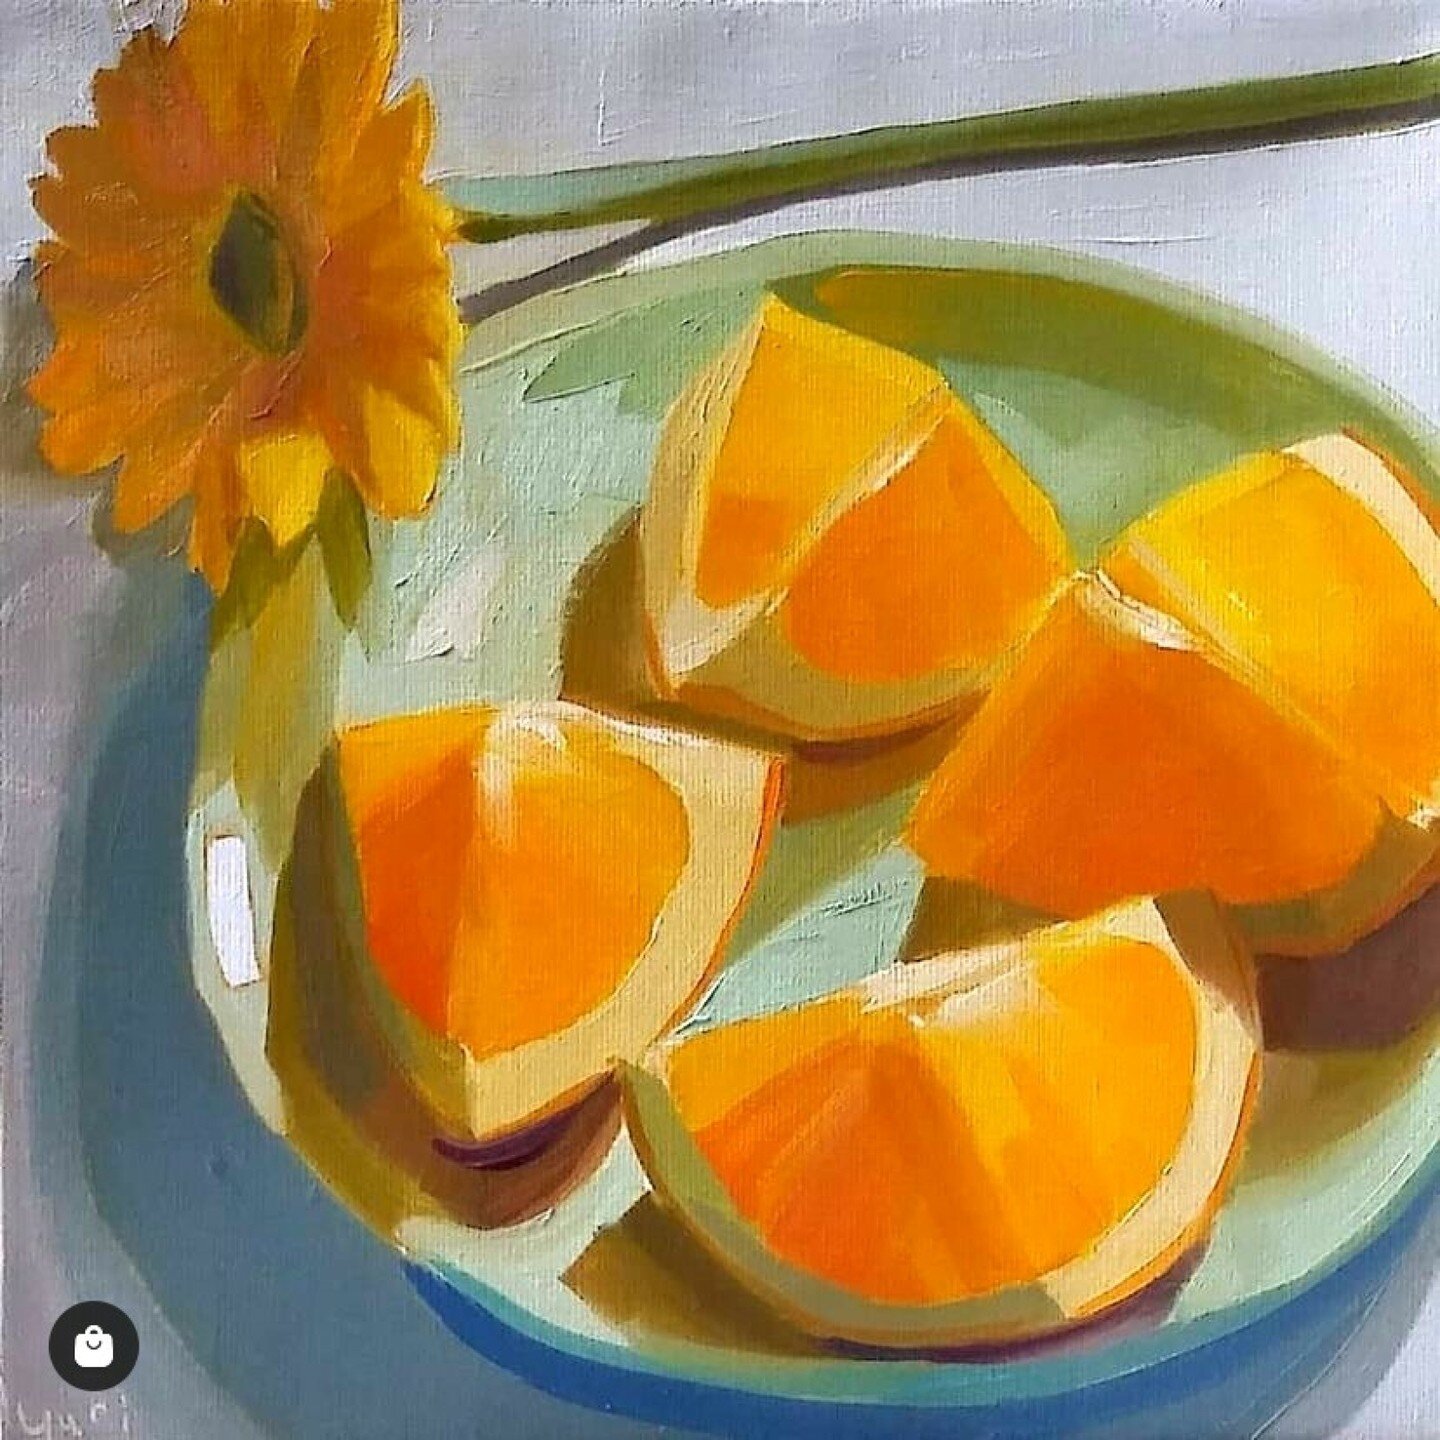 🔆 MEET THE ARTIST 🔆
I love discovering new-to-me artists  every time I open Instagram! You can follow hashtags like #allaprimapainting to fill your feed with bright sunny paintings on these cold winter days!

#slowriverstudio
www.slowriverstudio.co